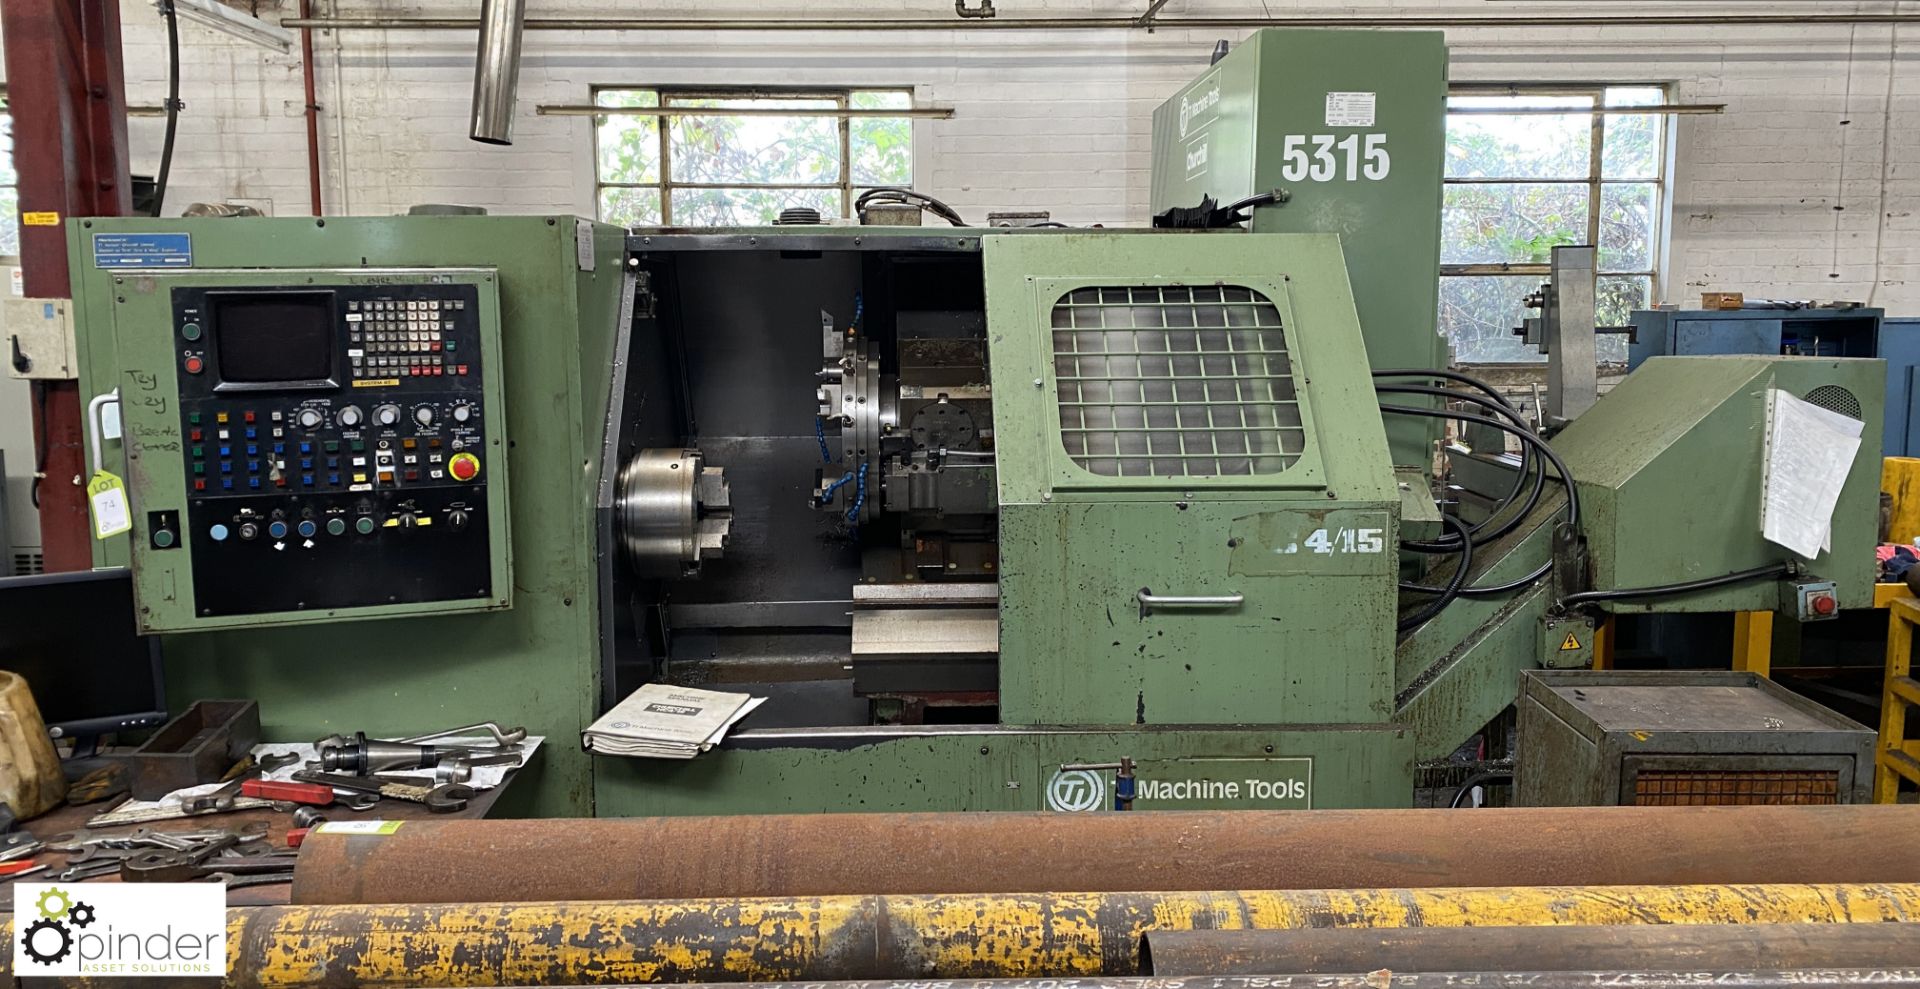 Churchill HC4/15 CNC slant bed Lathe, with Fanuc system 6T control, serial number 20187 (please note